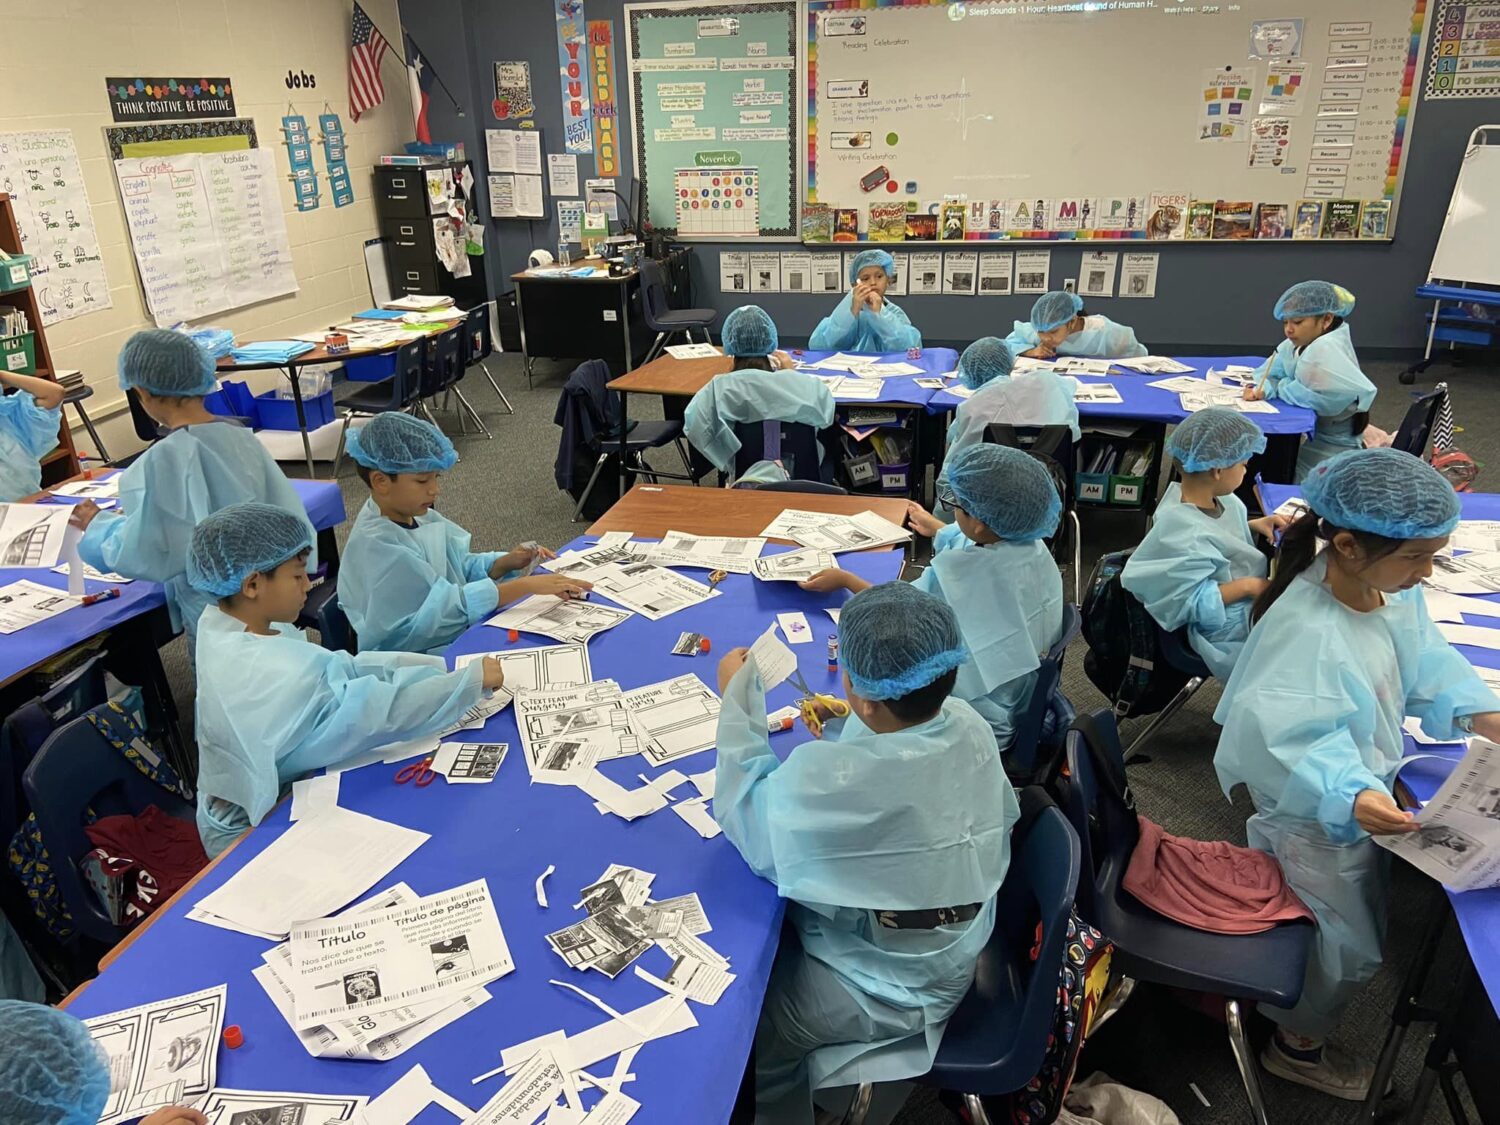 Students at Armstrong wear surgical attire as they "dissect" text in non-fiction books.